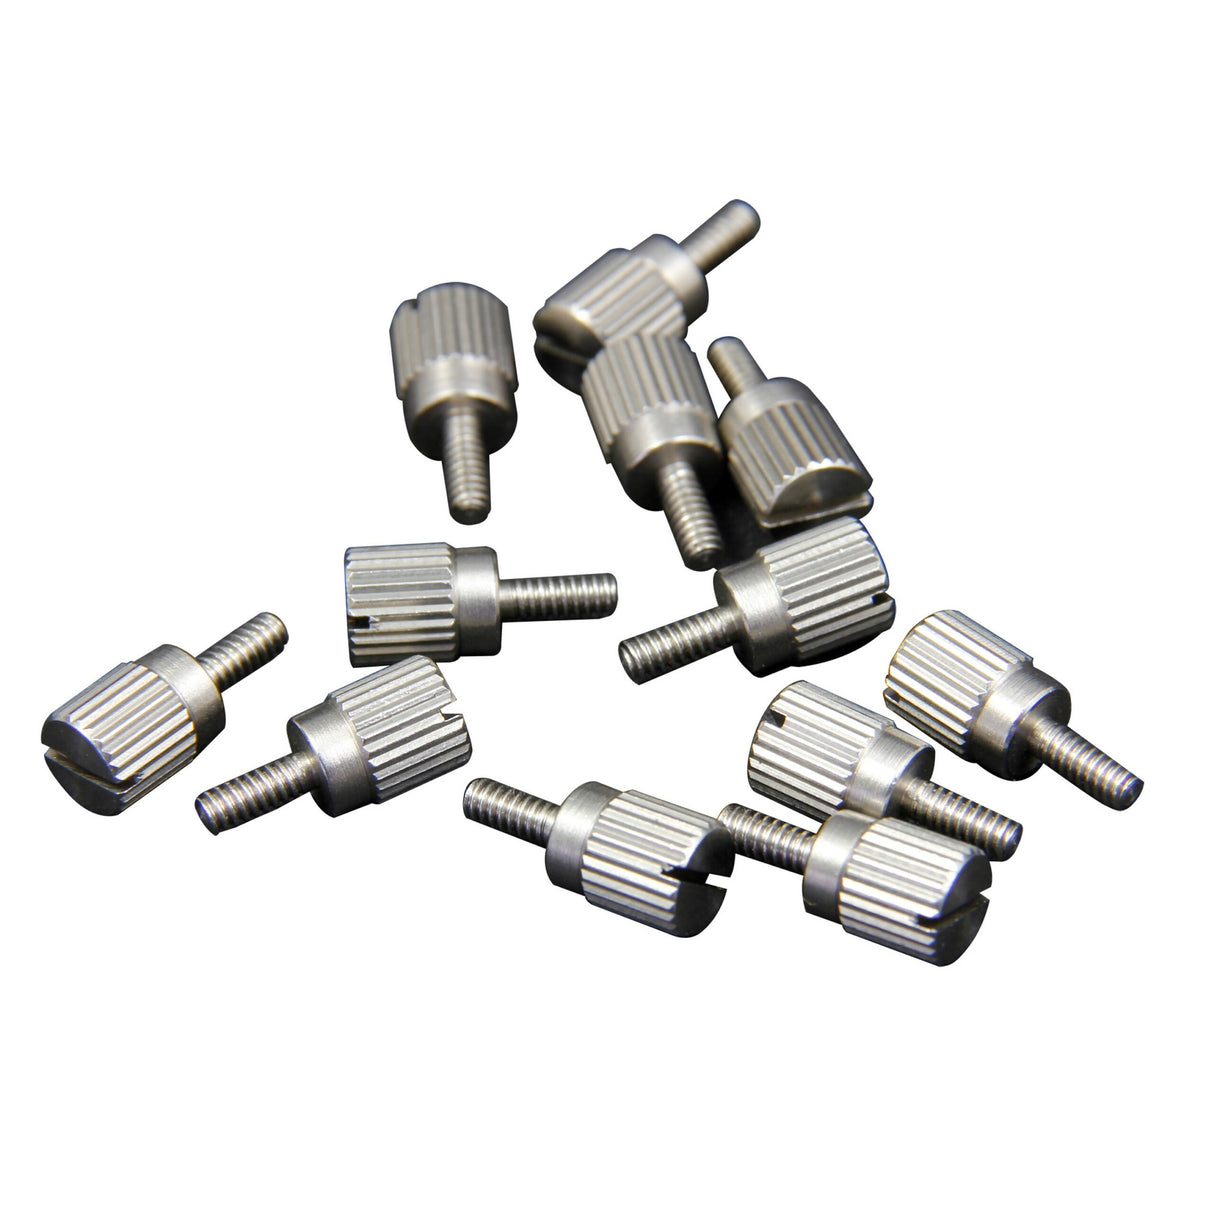 Radial ThumbSet Screws for 500 Series Racks and Modules